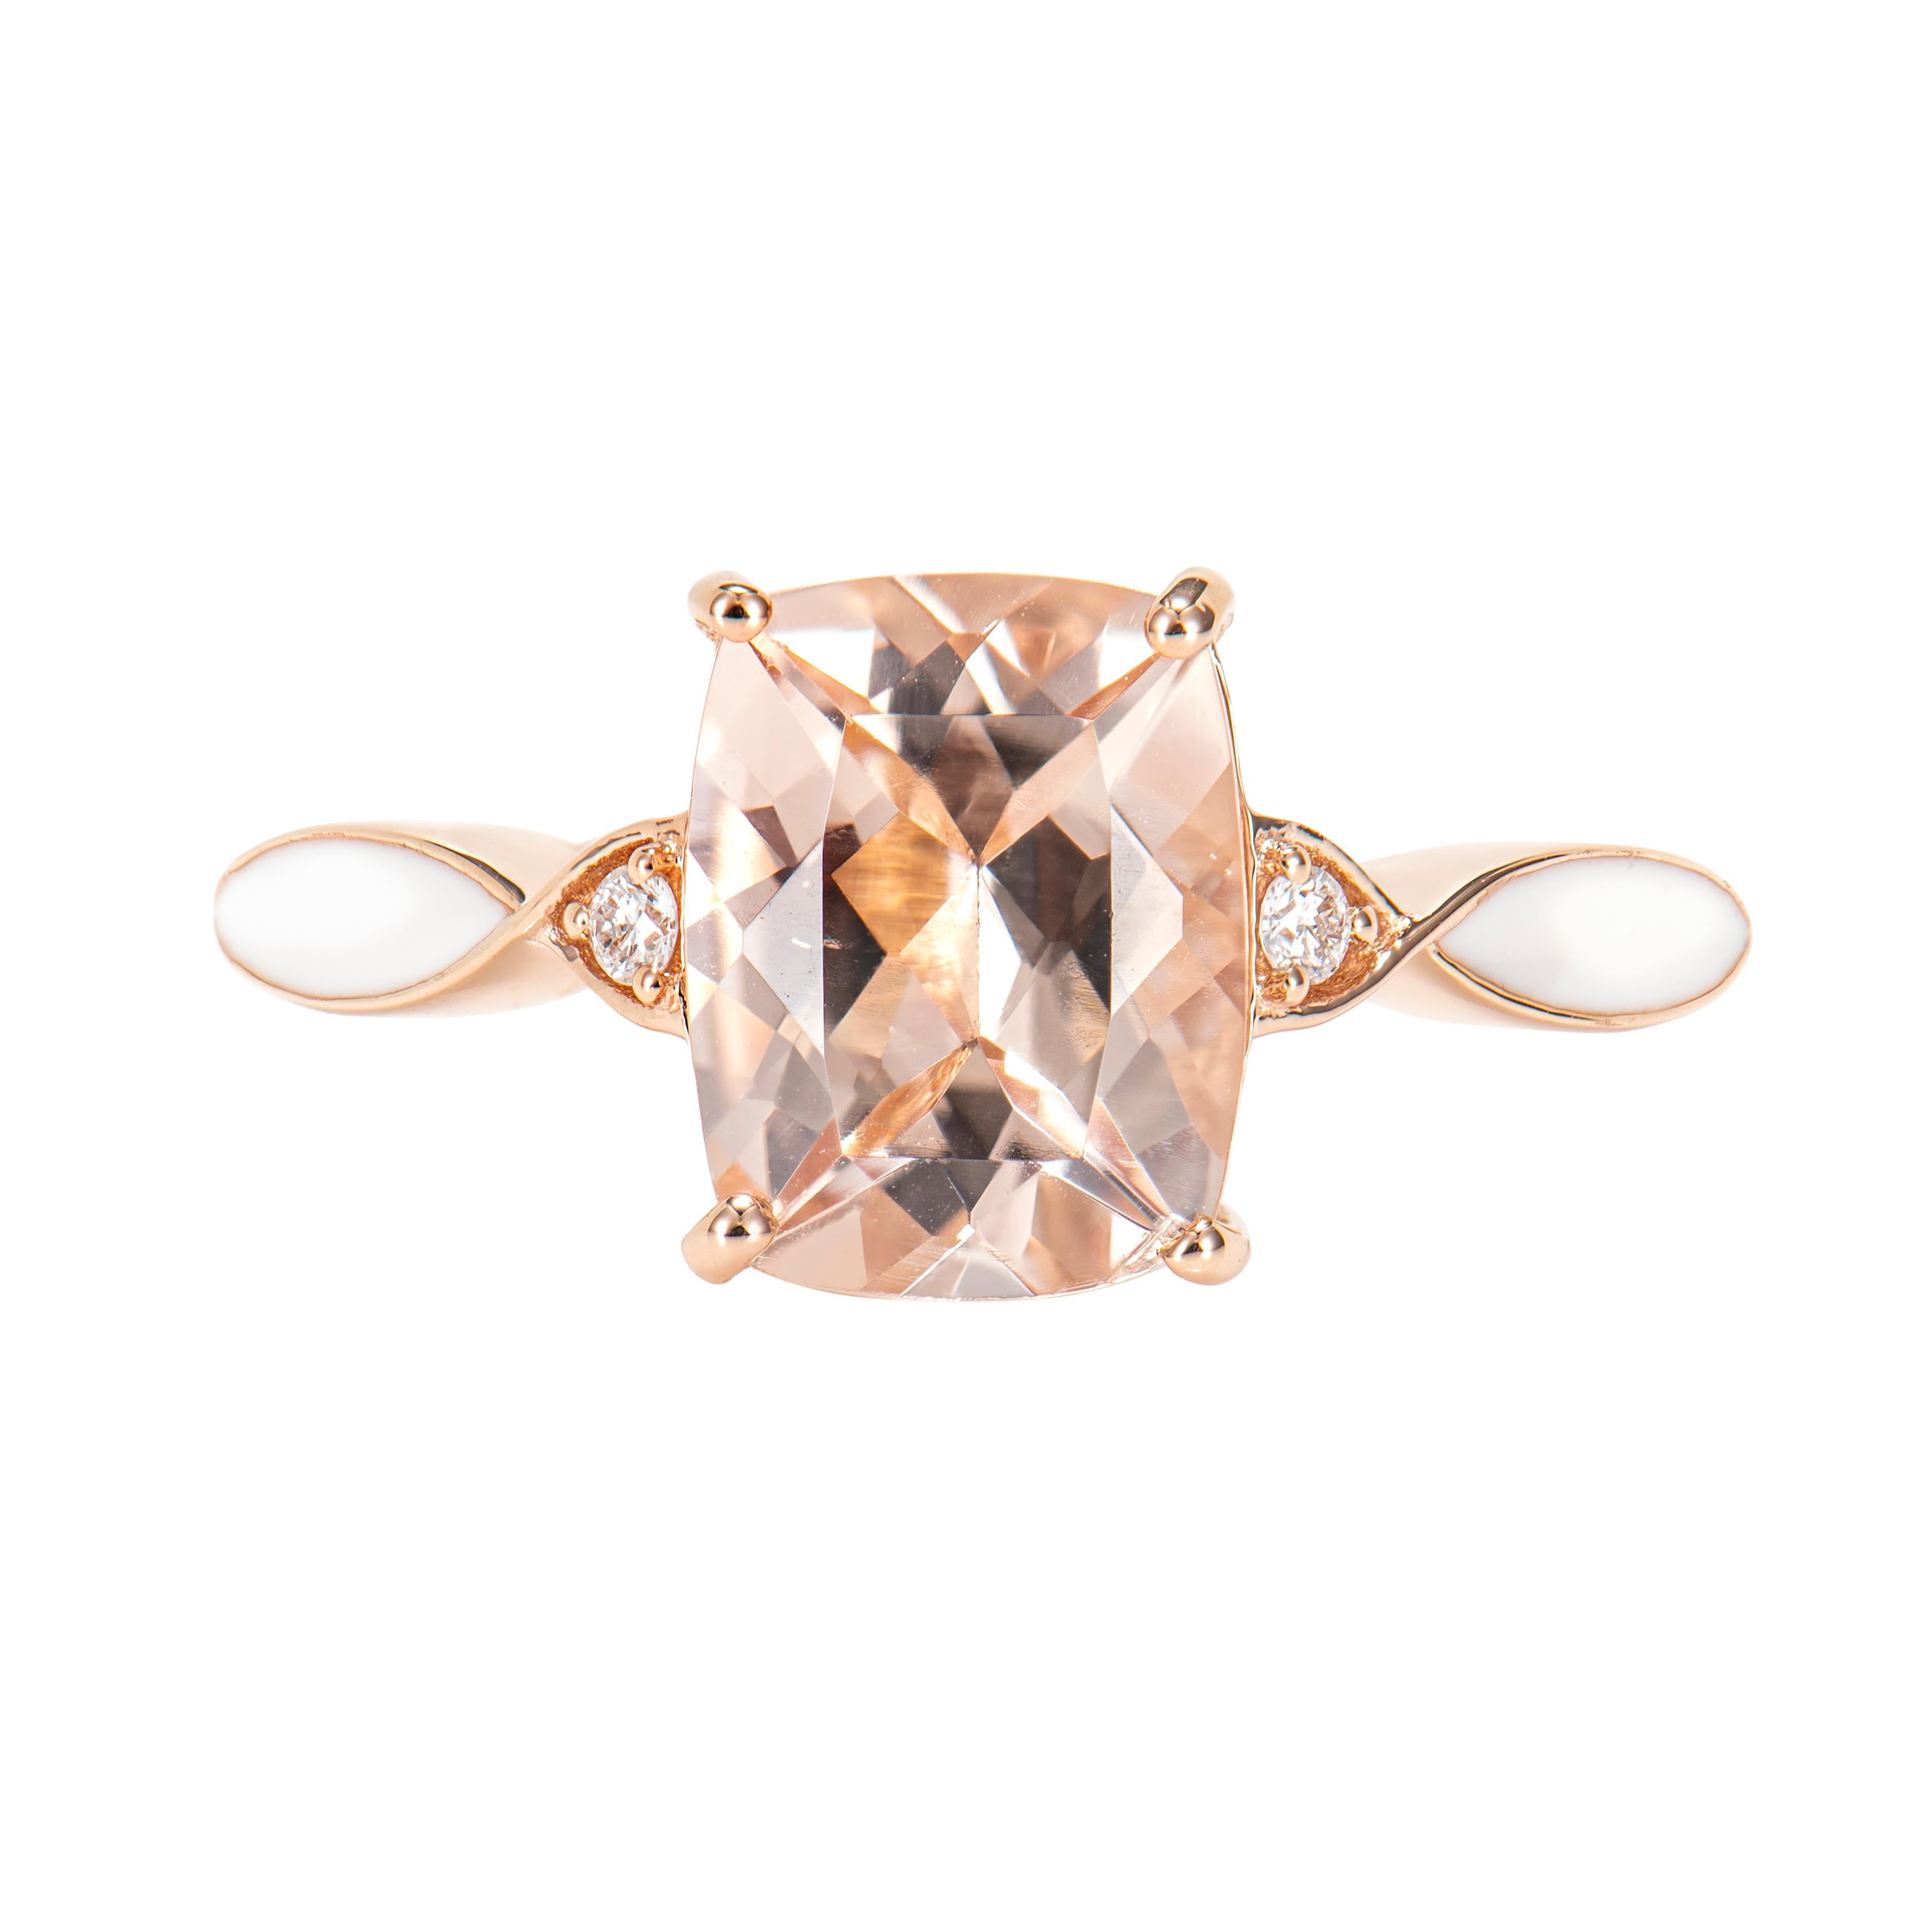 Contemporary 1.66 Carat Morganite Fancy Ring in 18Karat Rose Gold with White Diamond.   For Sale